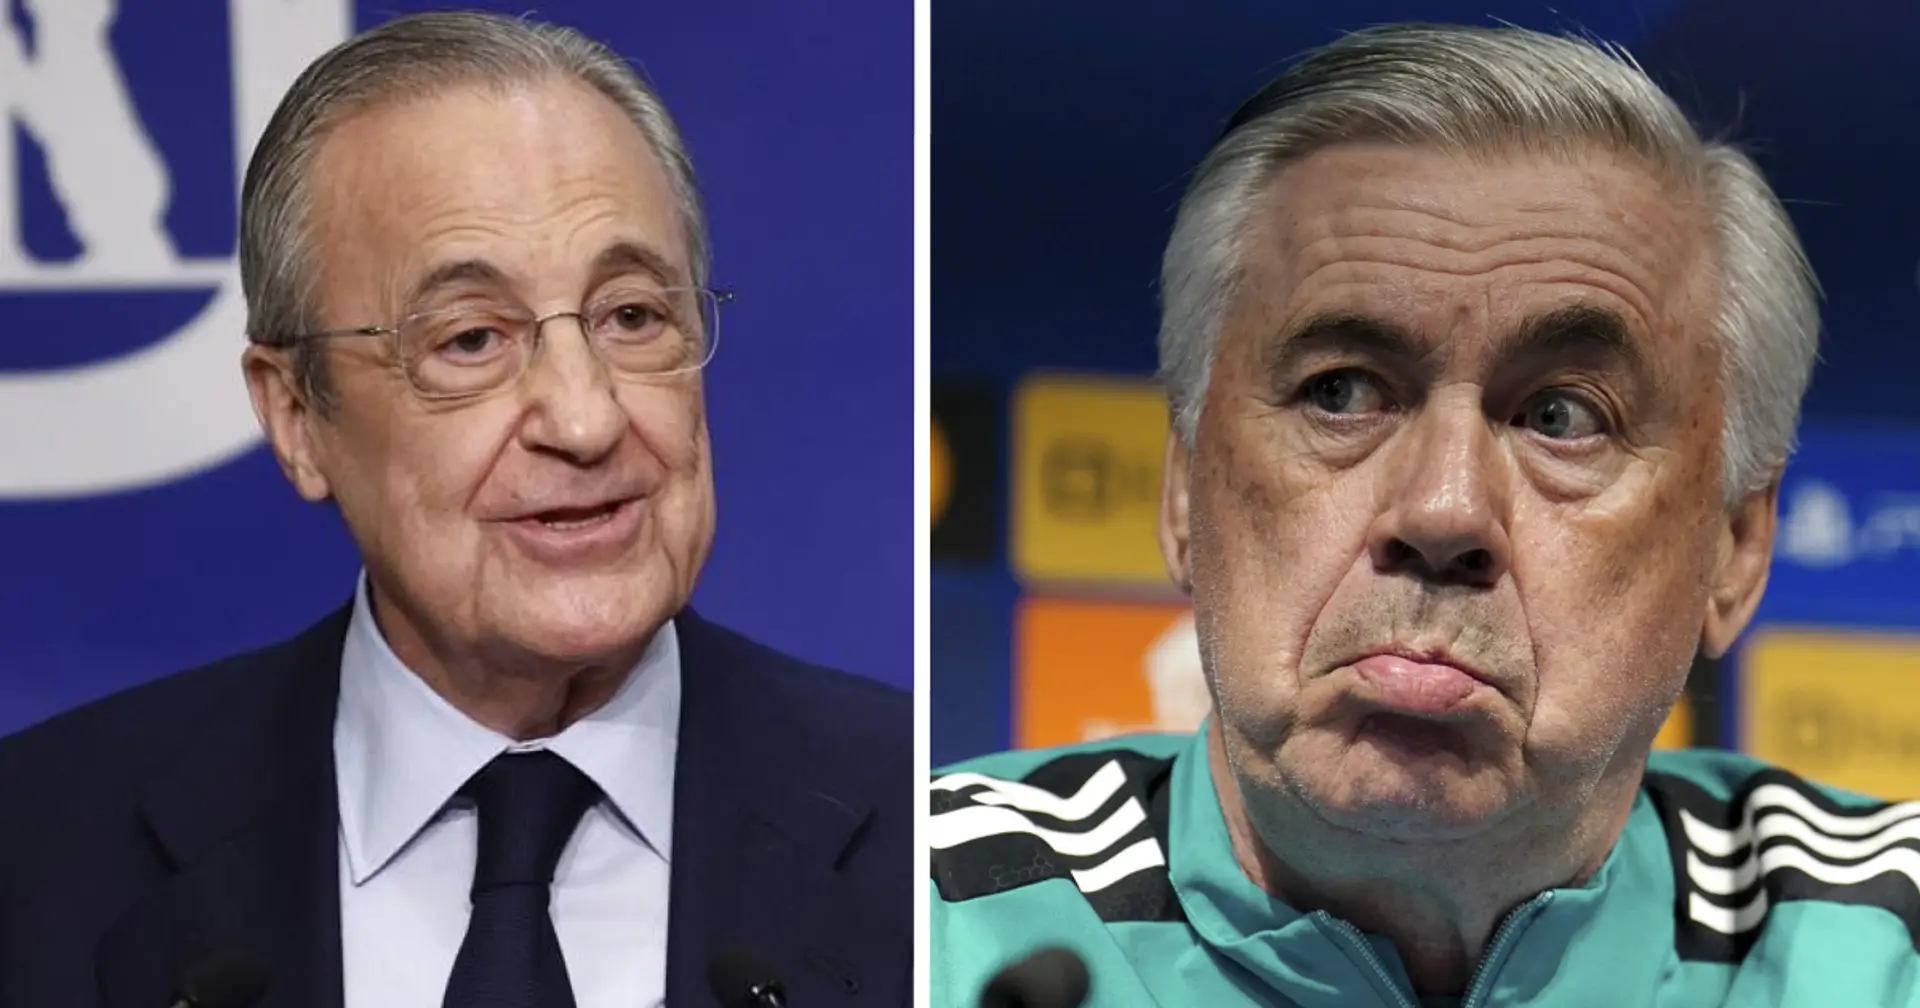 Real Madrid final decision on Carlo Ancelotti replacement unveiled